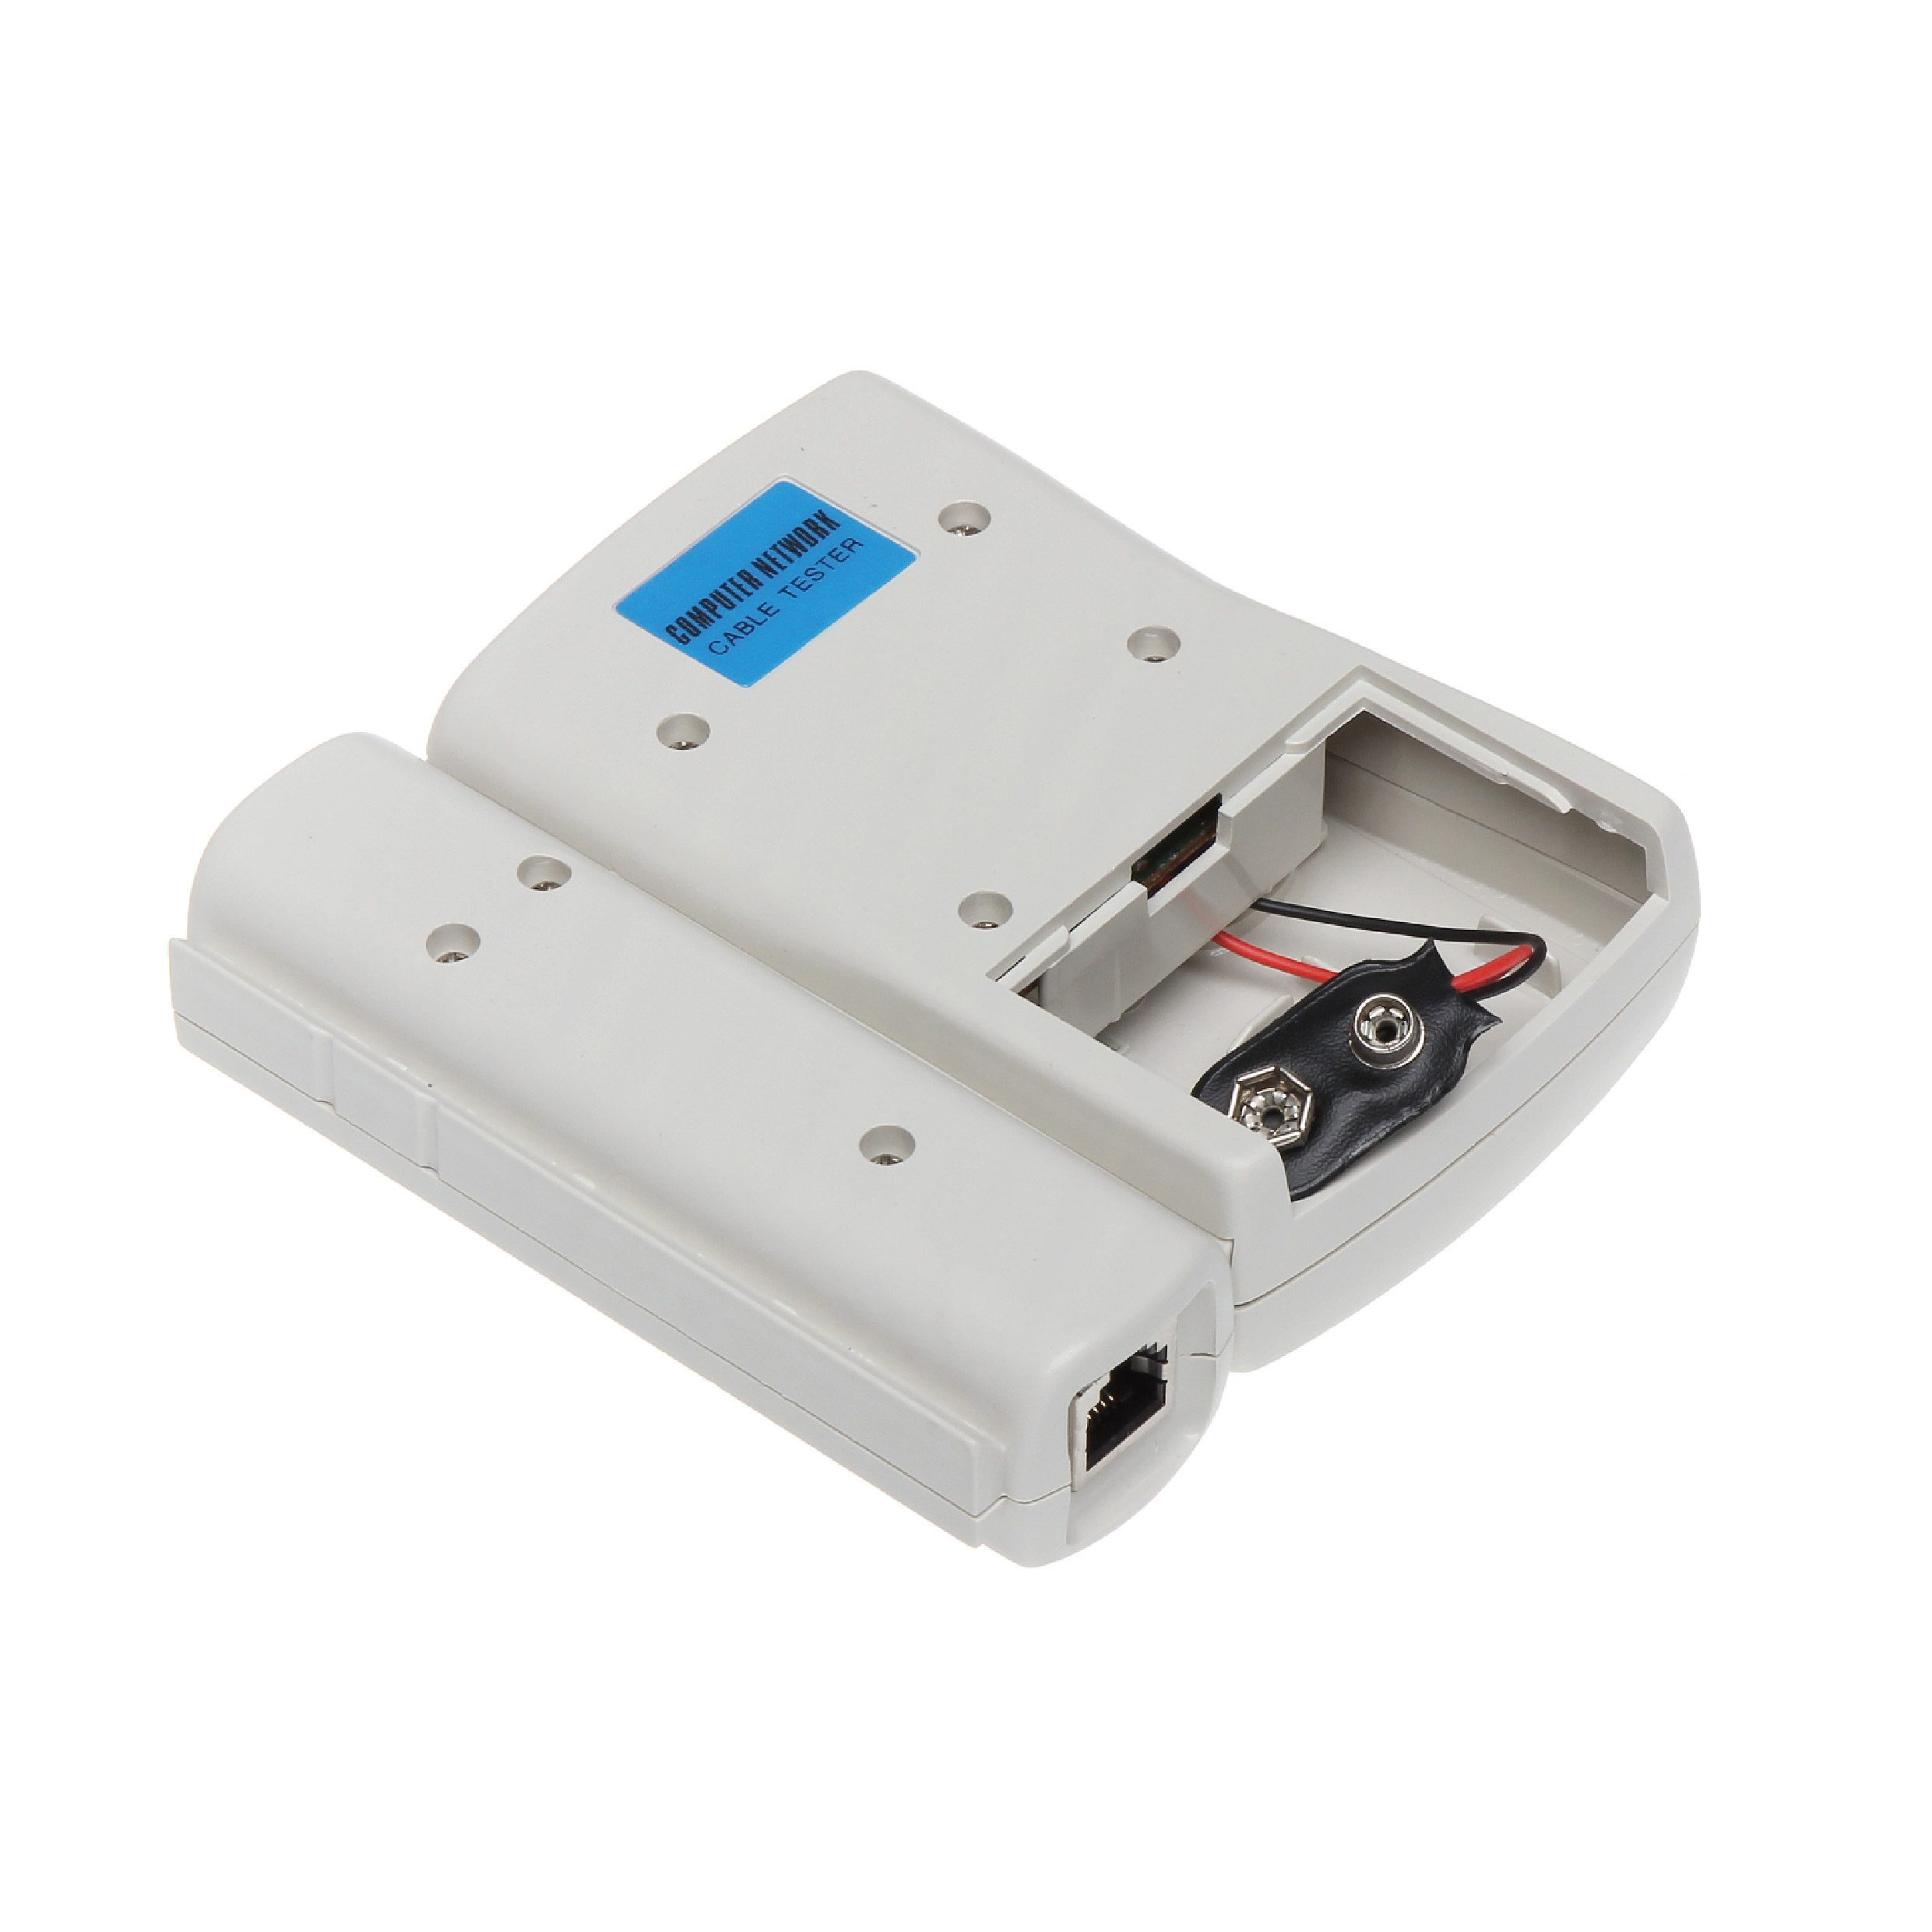 NWT-SY-468 RJ11 Cable & RJ45 Network Tester